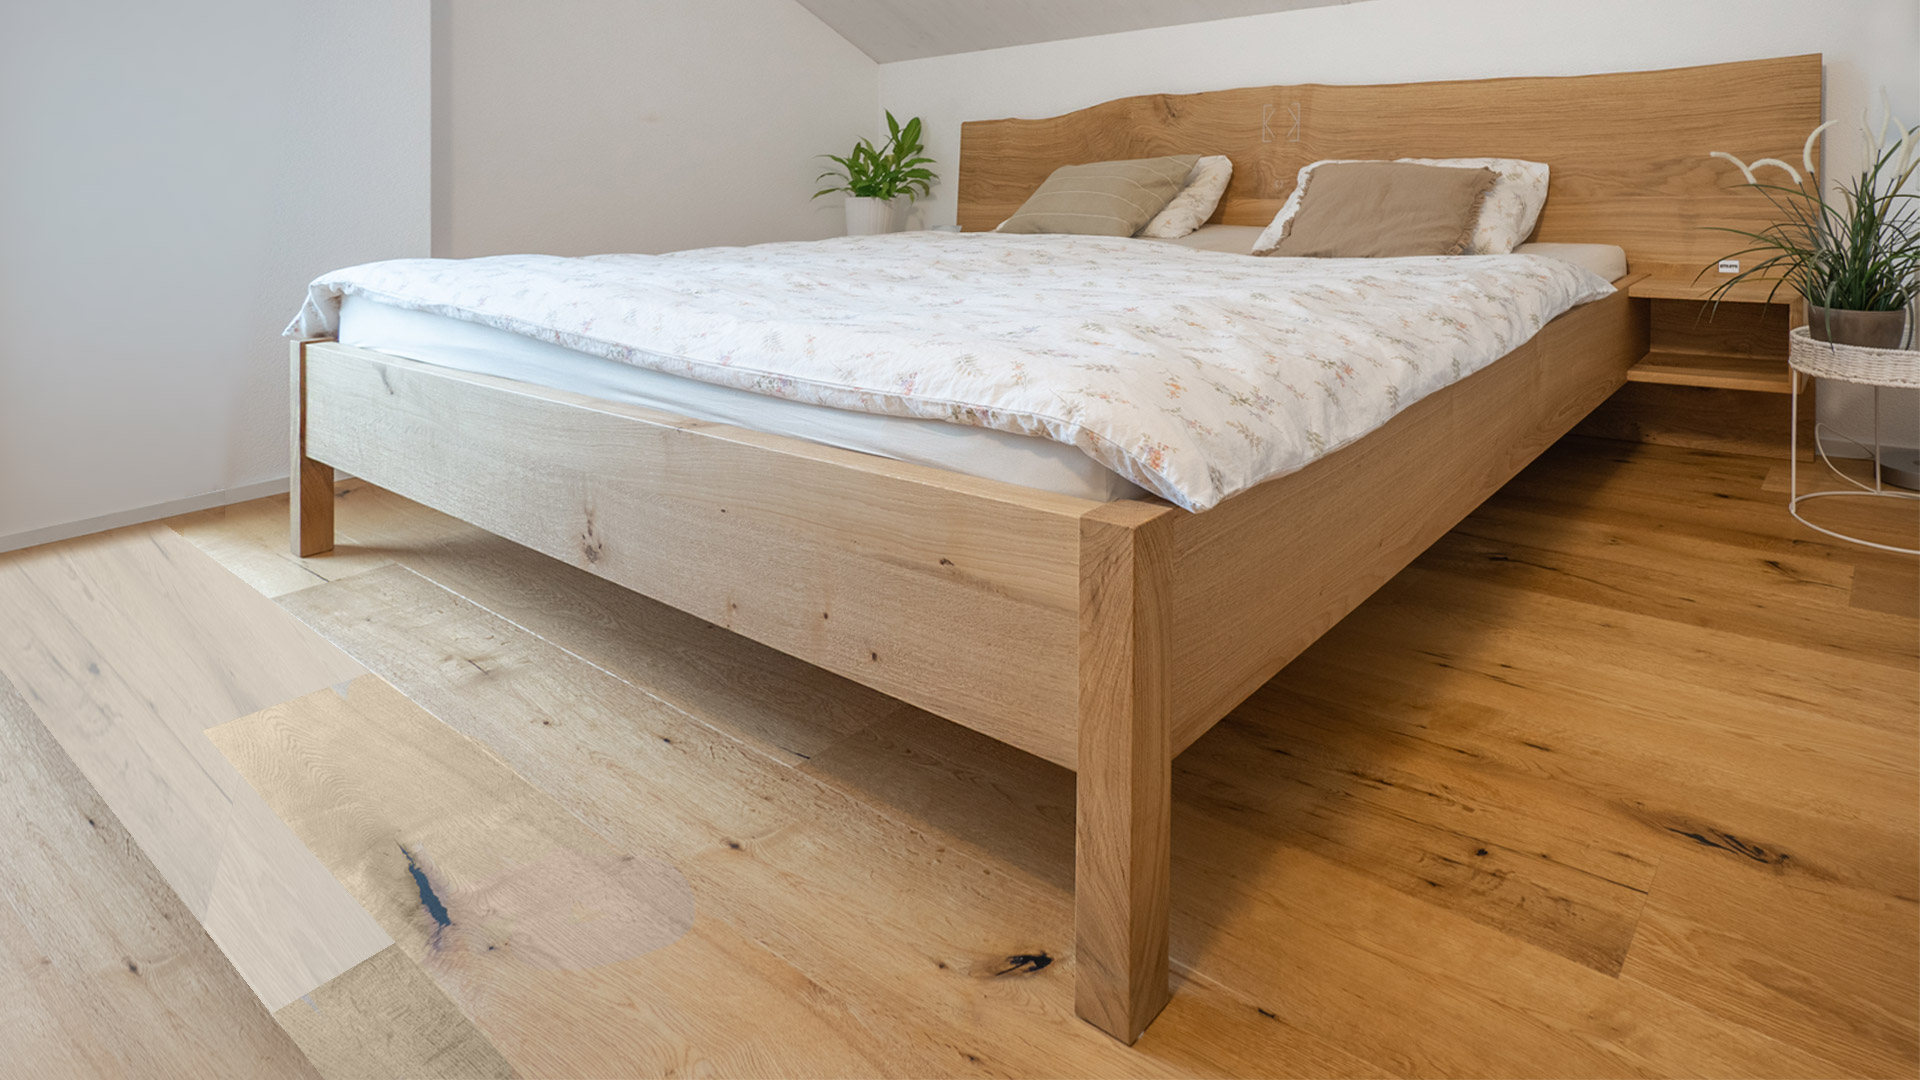 Solid wood bed by Fanger Design, Swiss Made